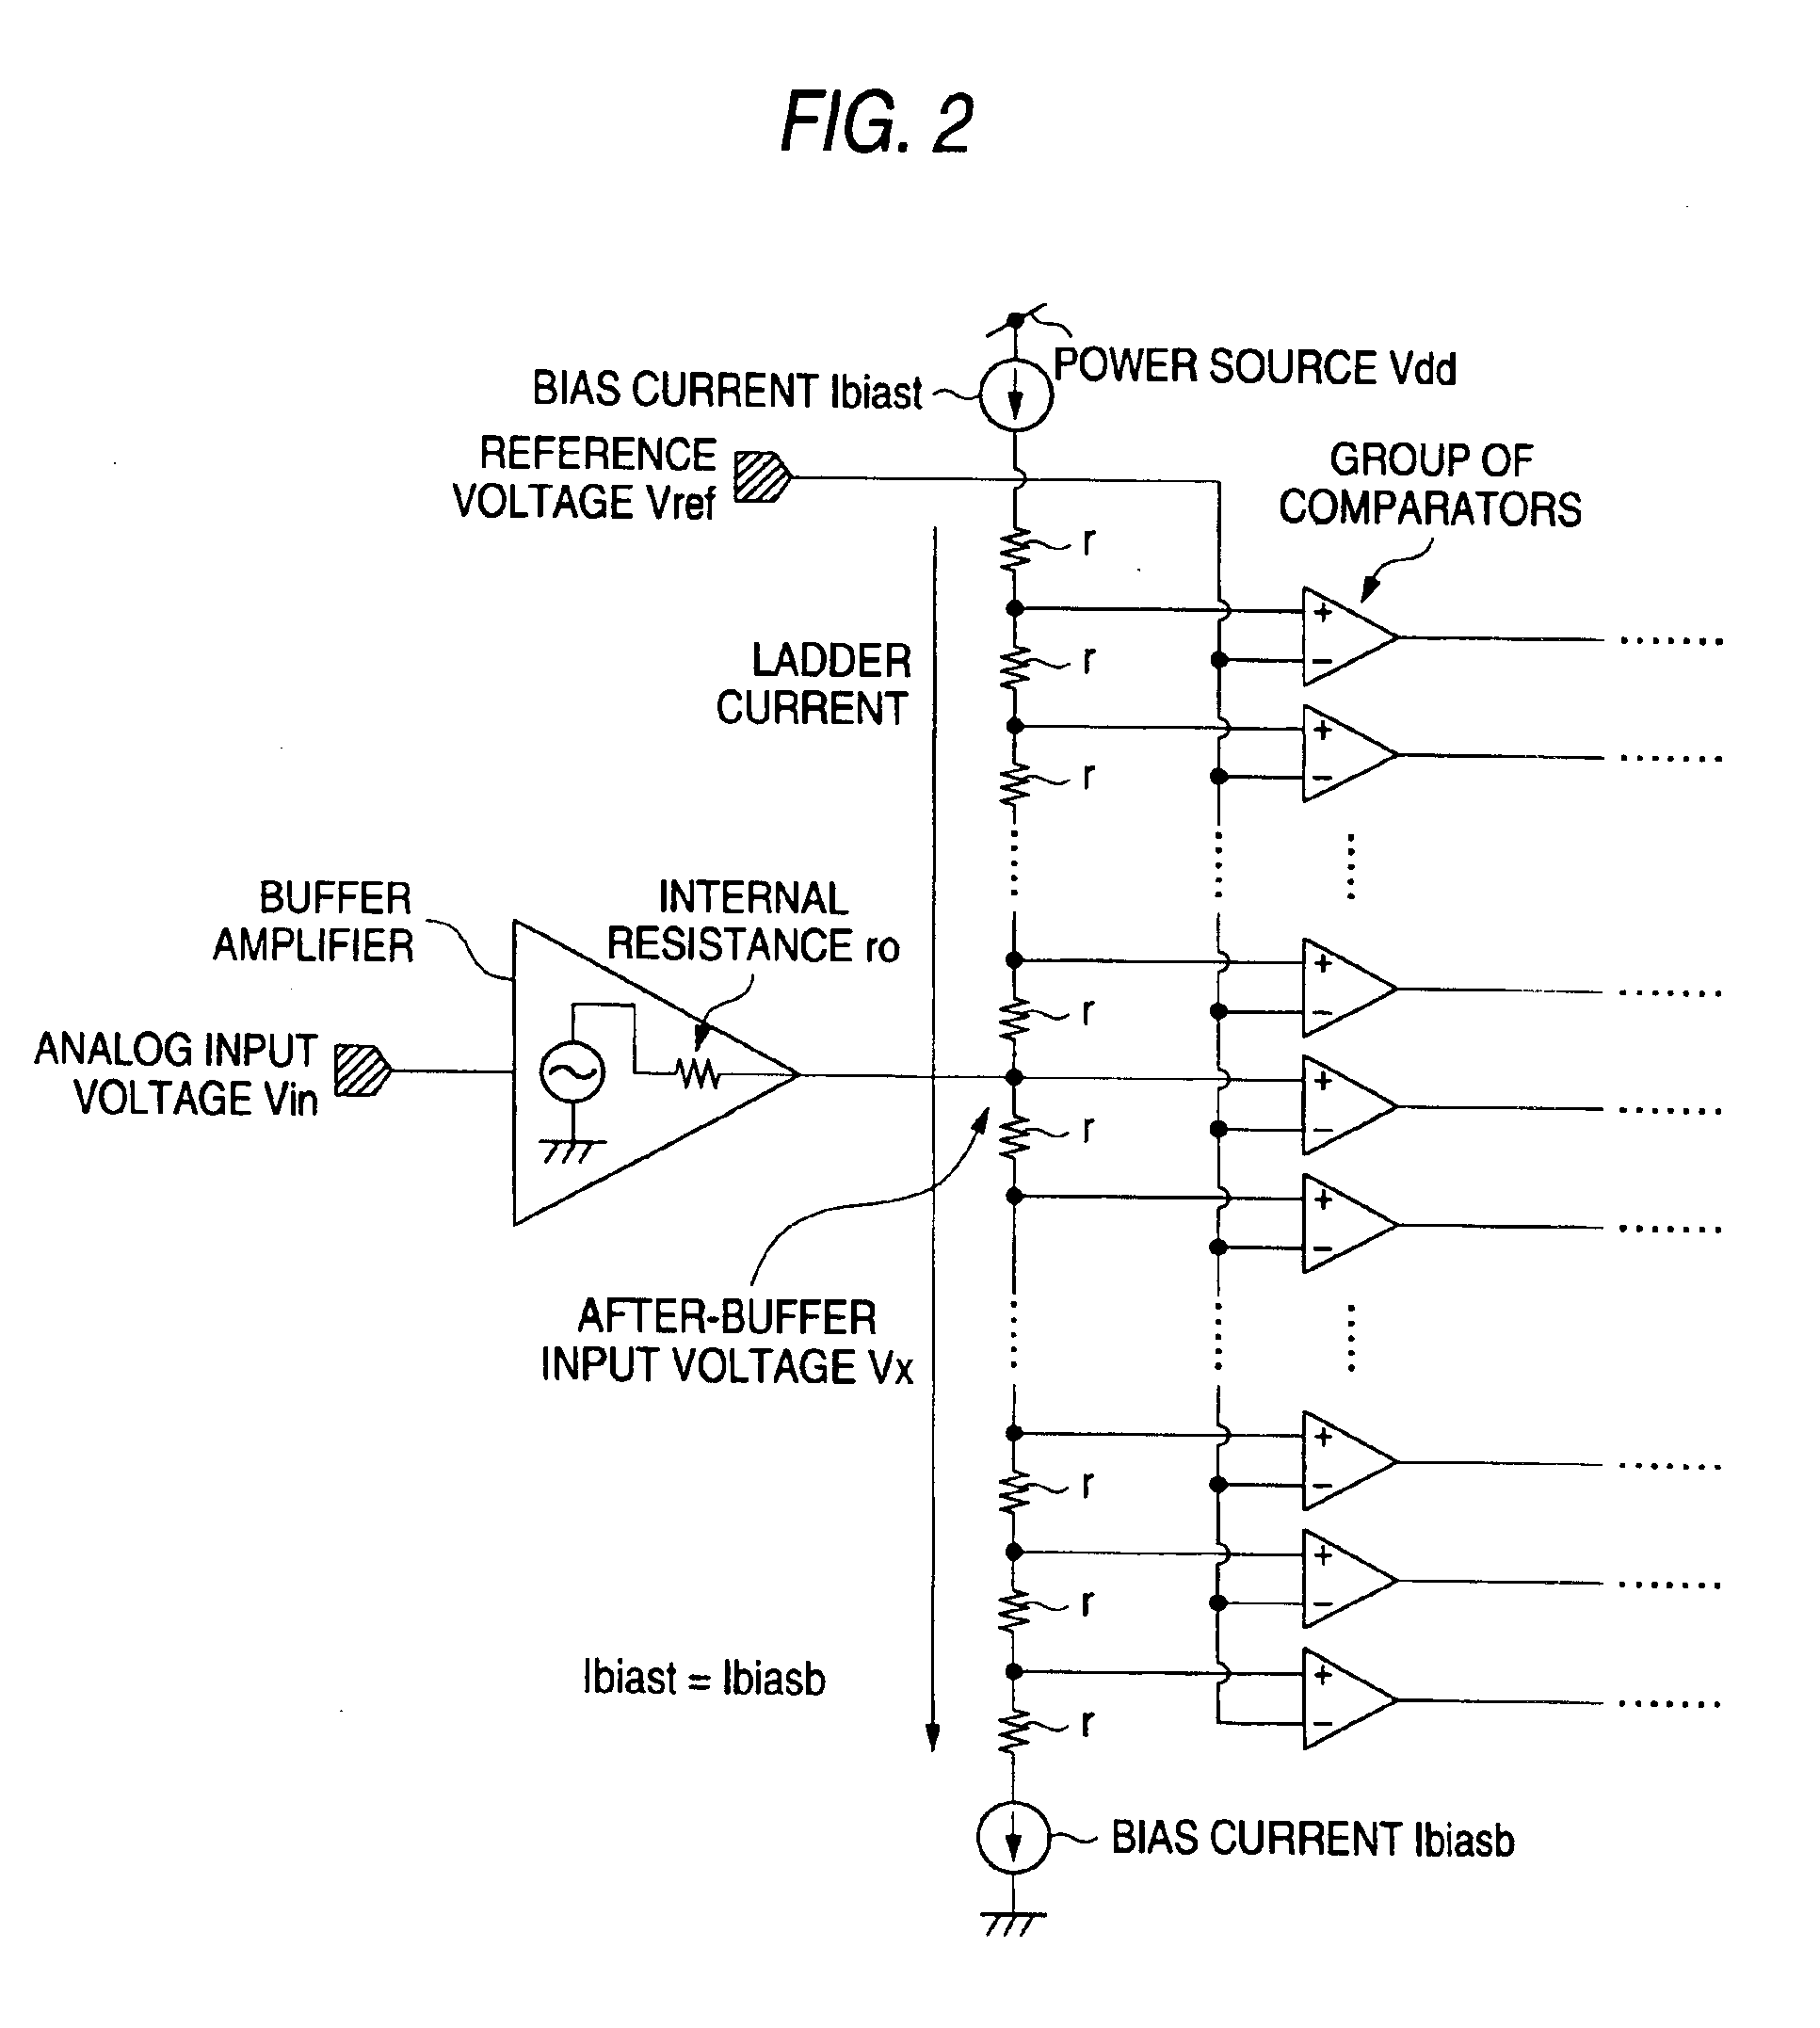 Analog to digital converter with voltage comparators that compare a reference voltage with voltages at connection points on a resistor ladder